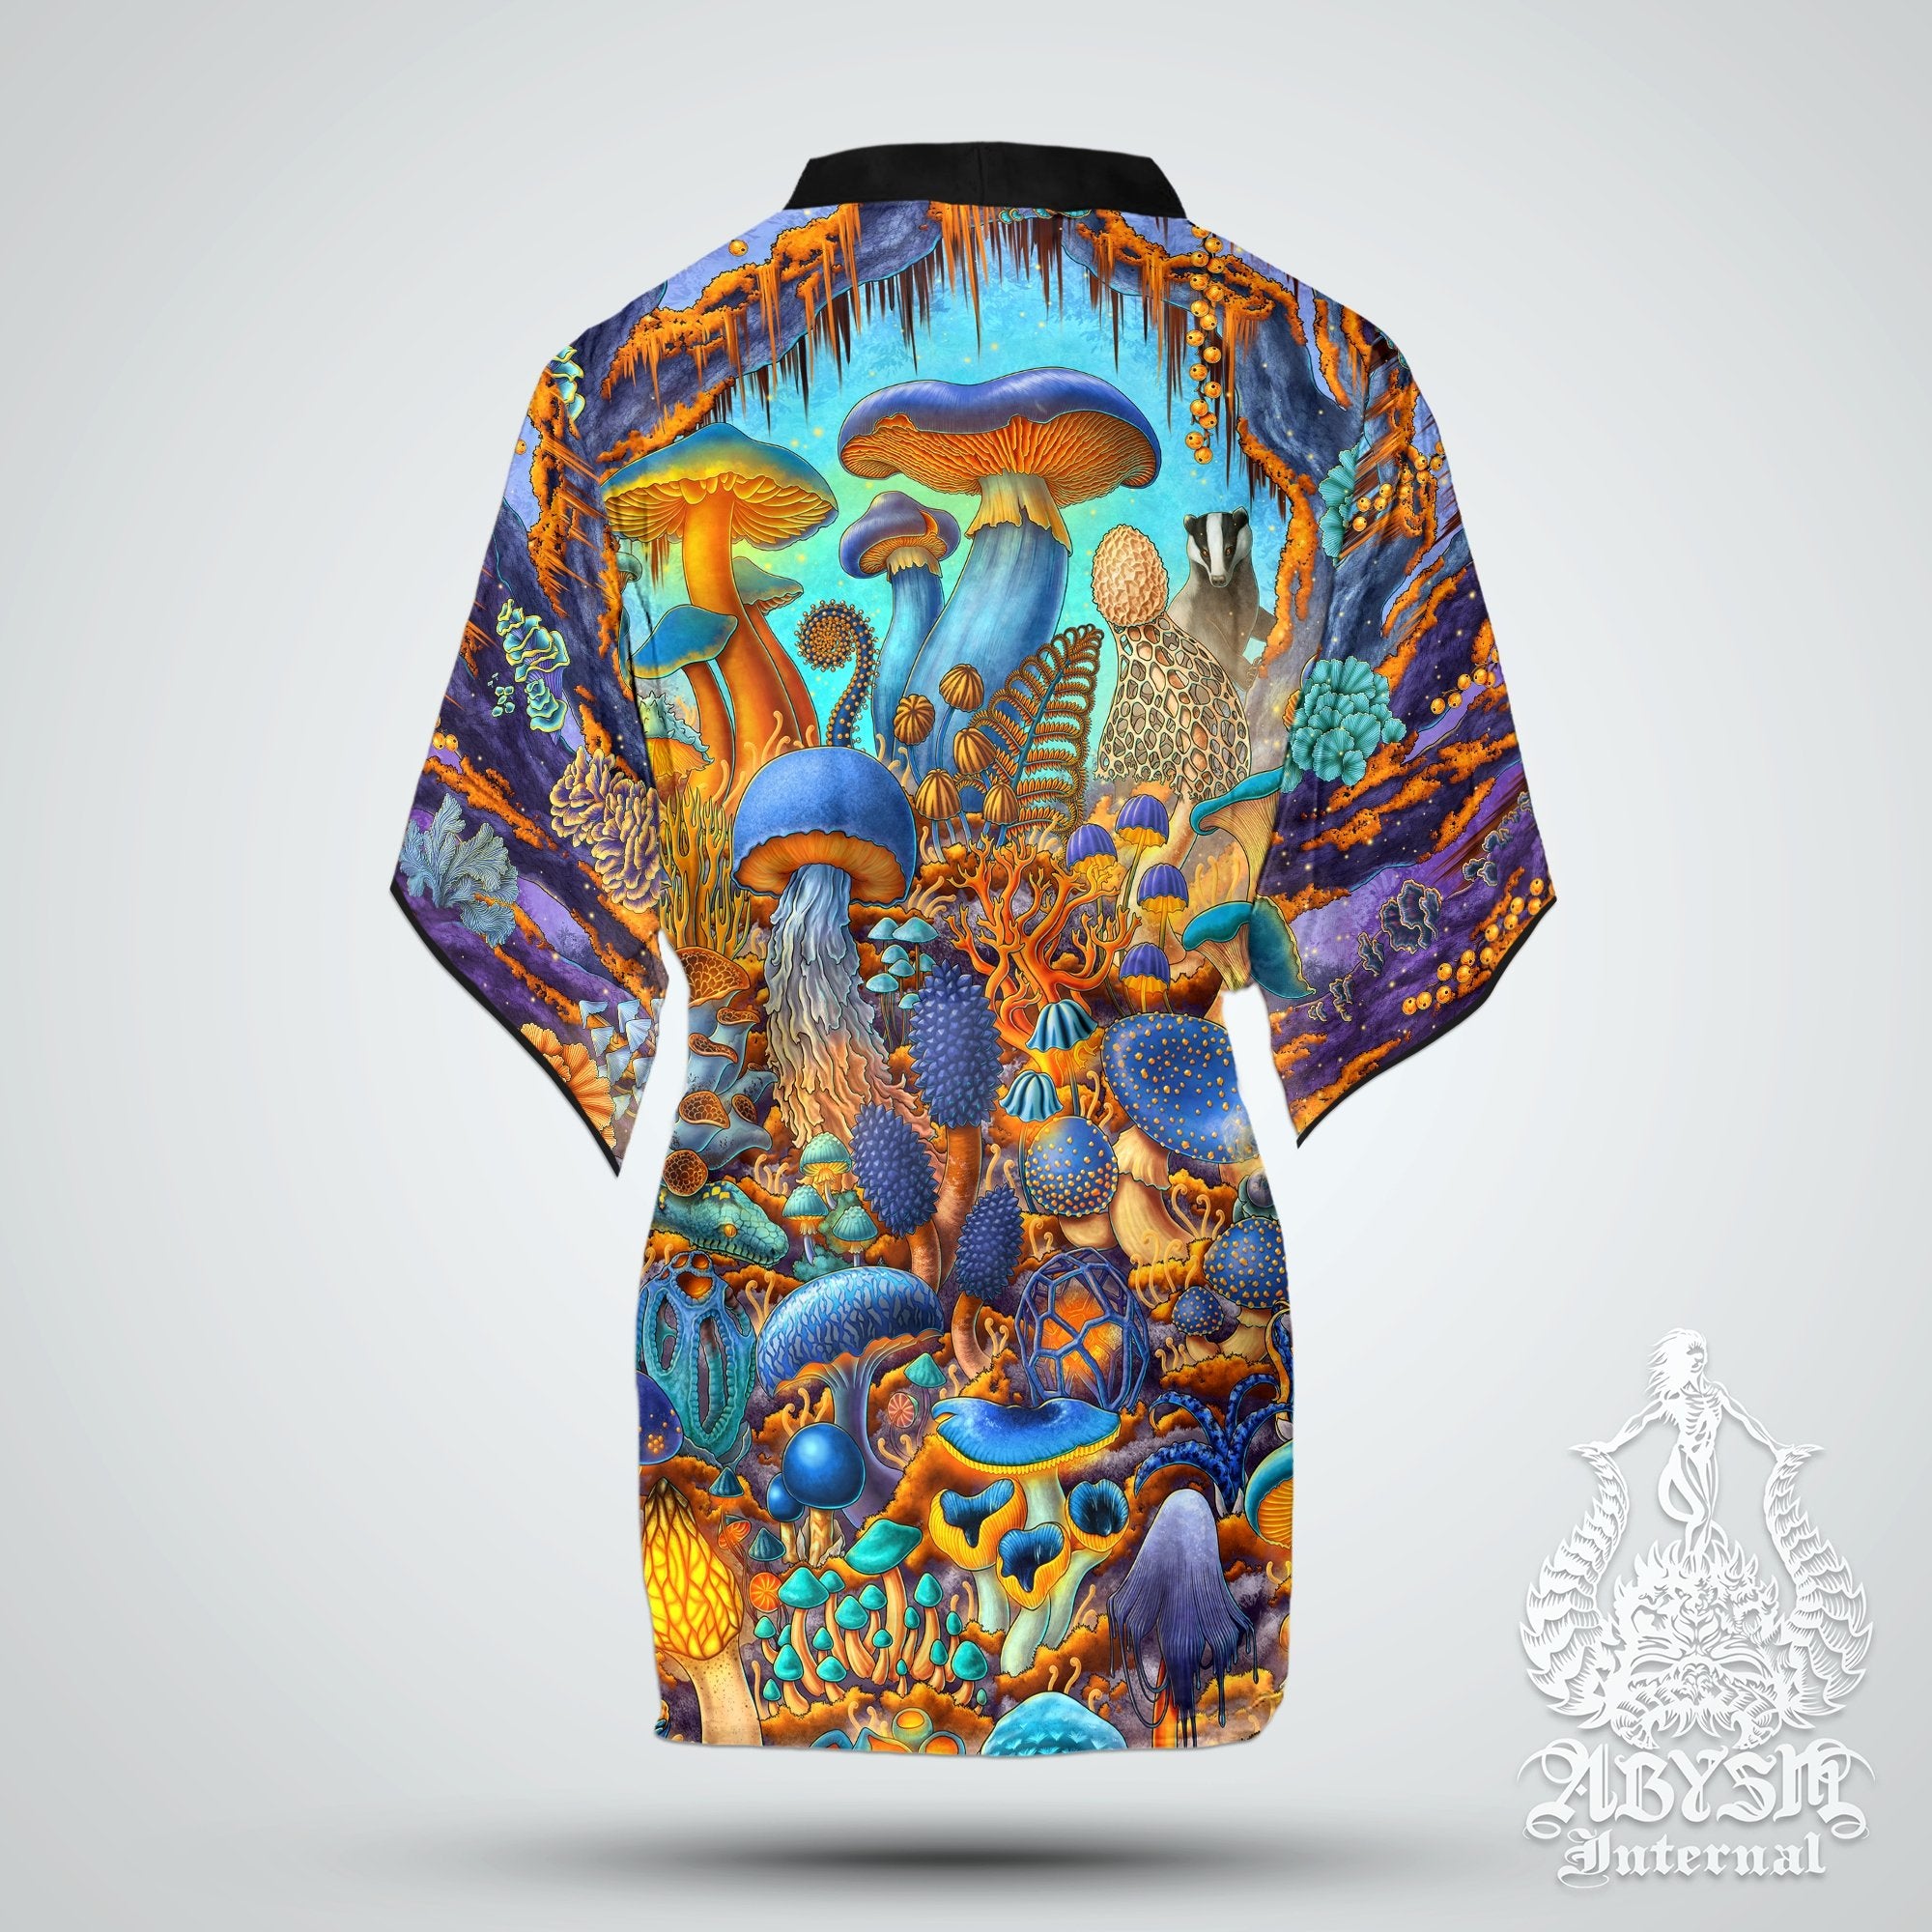 Mushrooms Cover Up, Mycologyst Gift, Biology Teacher Outfit, Hippie Party Kimono, Summer Festival Robe, Magic Shrooms, Mycology Art, Alternative Clothing, Unisex - Cyan and Gold - Abysm Internal